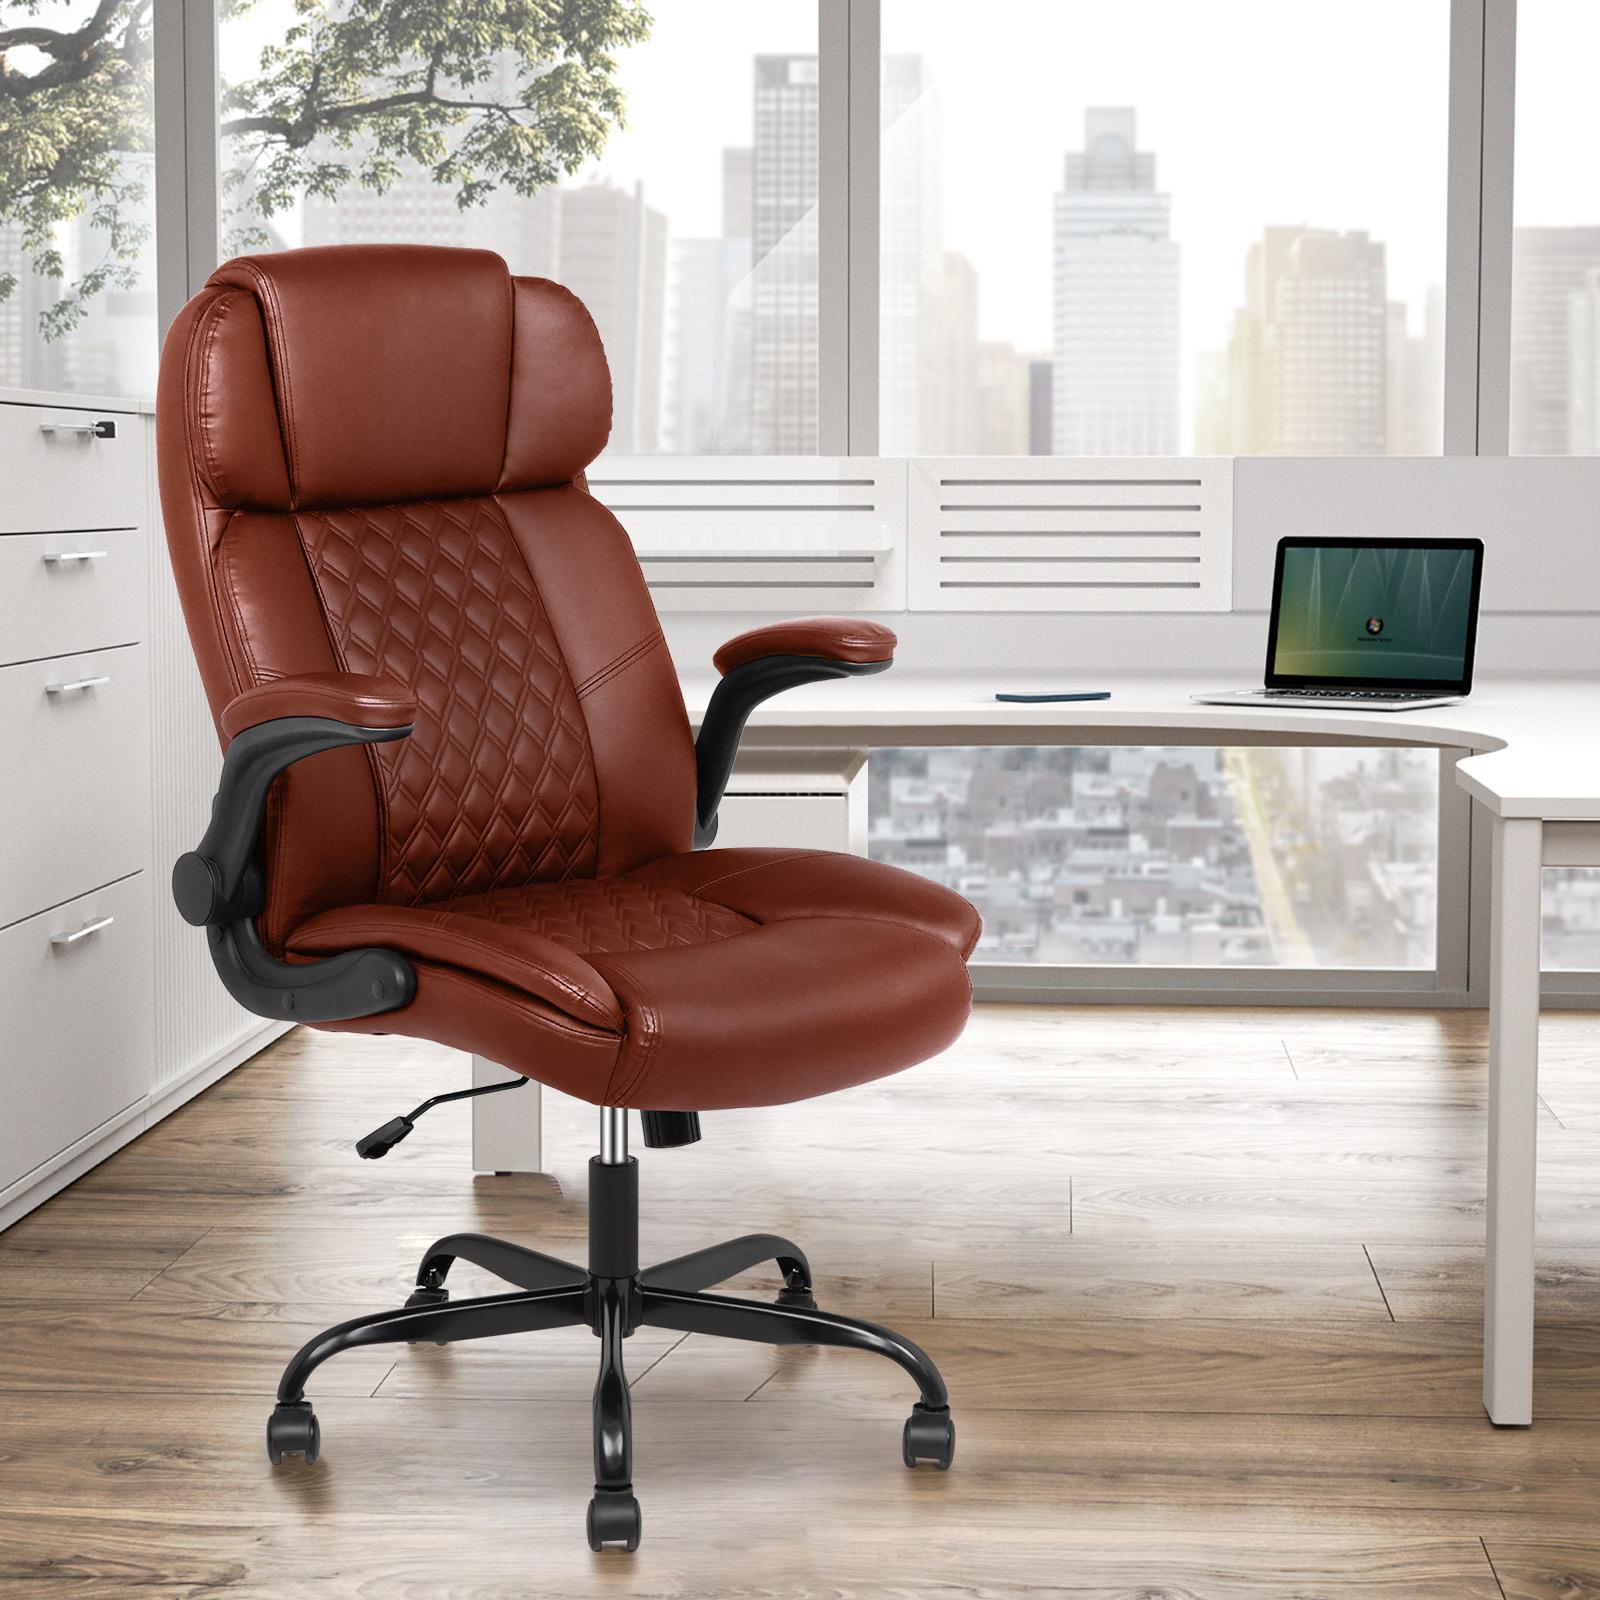 Advwin Ergonomic Office Chair High Back Home Desk Chair with Flip-up Armrests PU Leather Padded Chair Brown